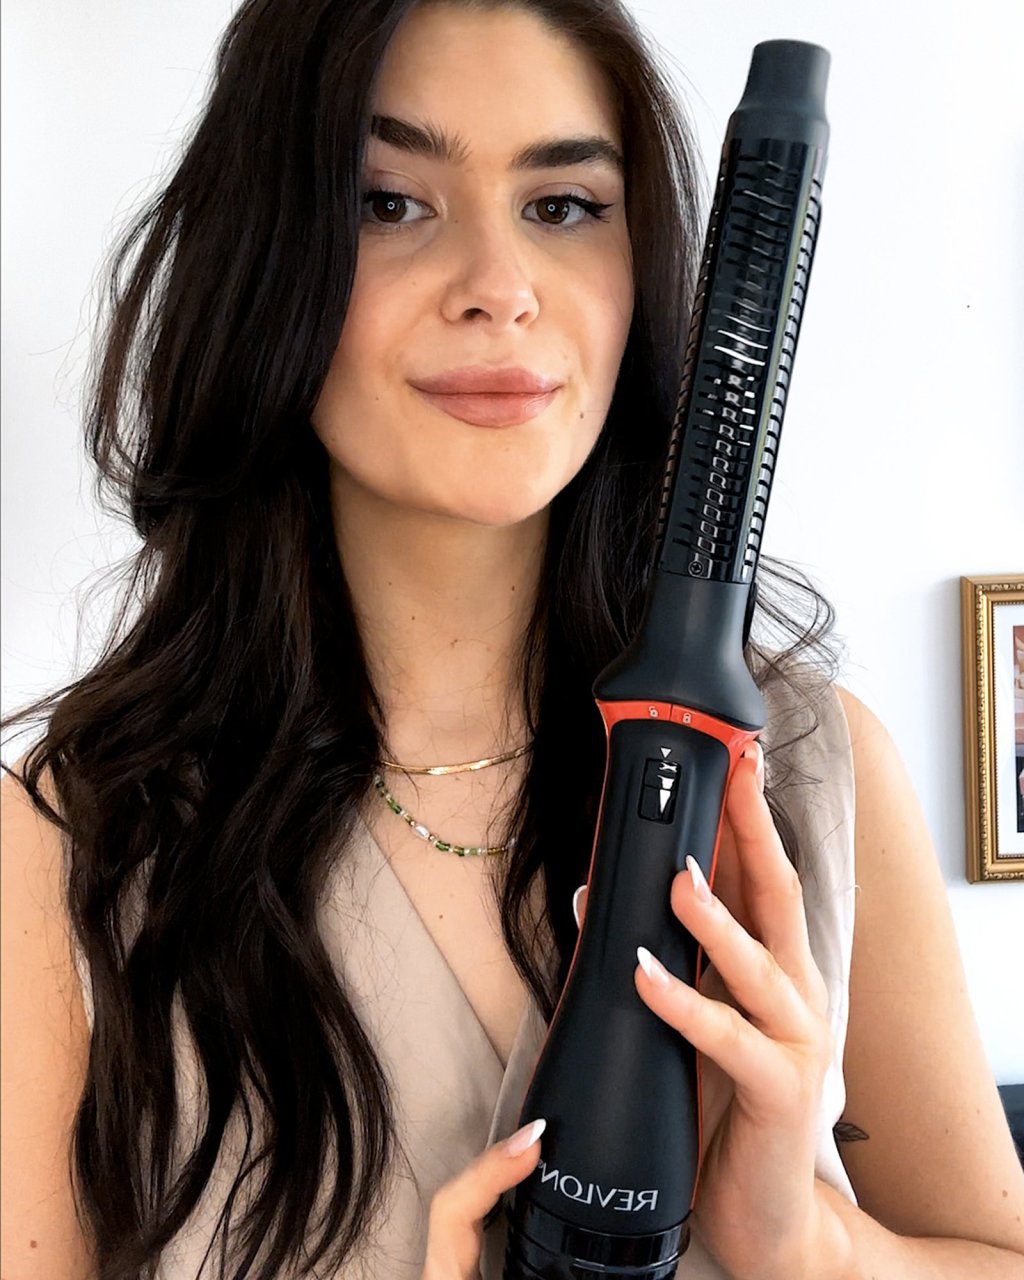 Revlon One-Step Hair Dryer Brush Review: Why the Blow-Dry Brush Is Worth It